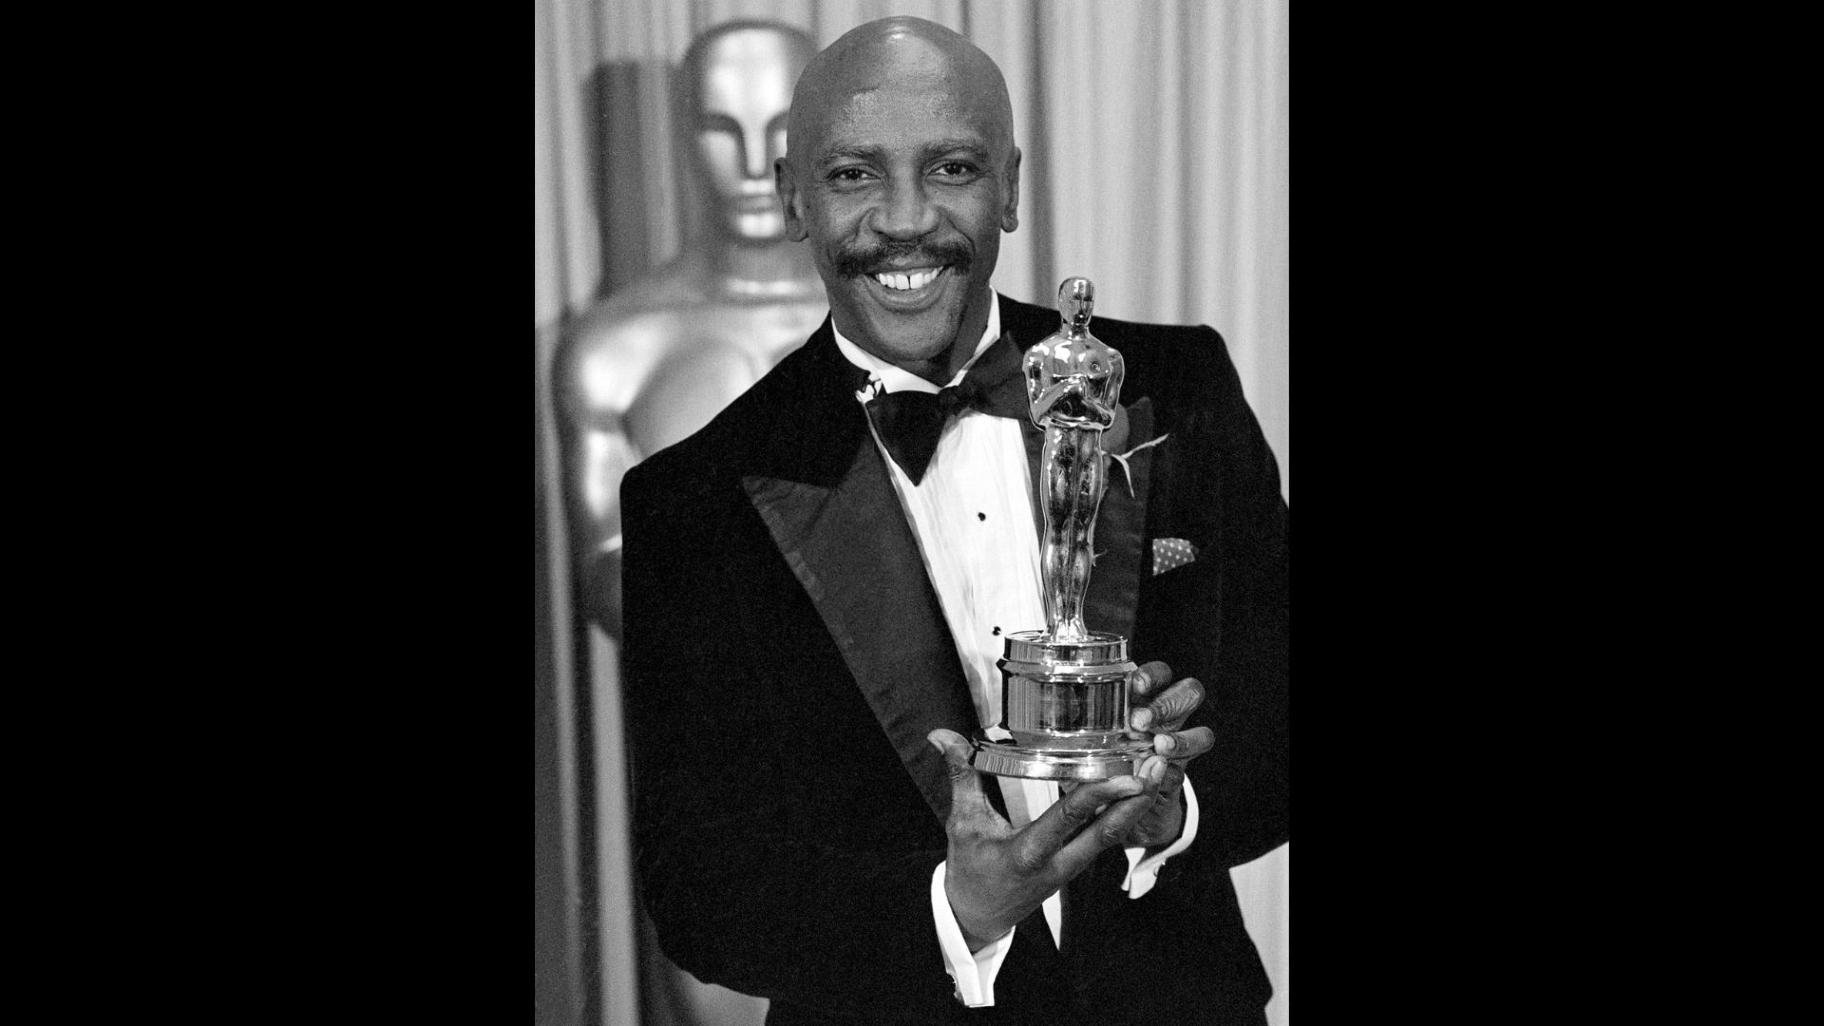 FILE - Louis Gossett Jr., poses with the Oscar for best supporting actor for his role in "An Officer and a Gentleman," at the annual Academy Awards presentation in Los Angeles on April 11, 1983. (AP Photo, File)